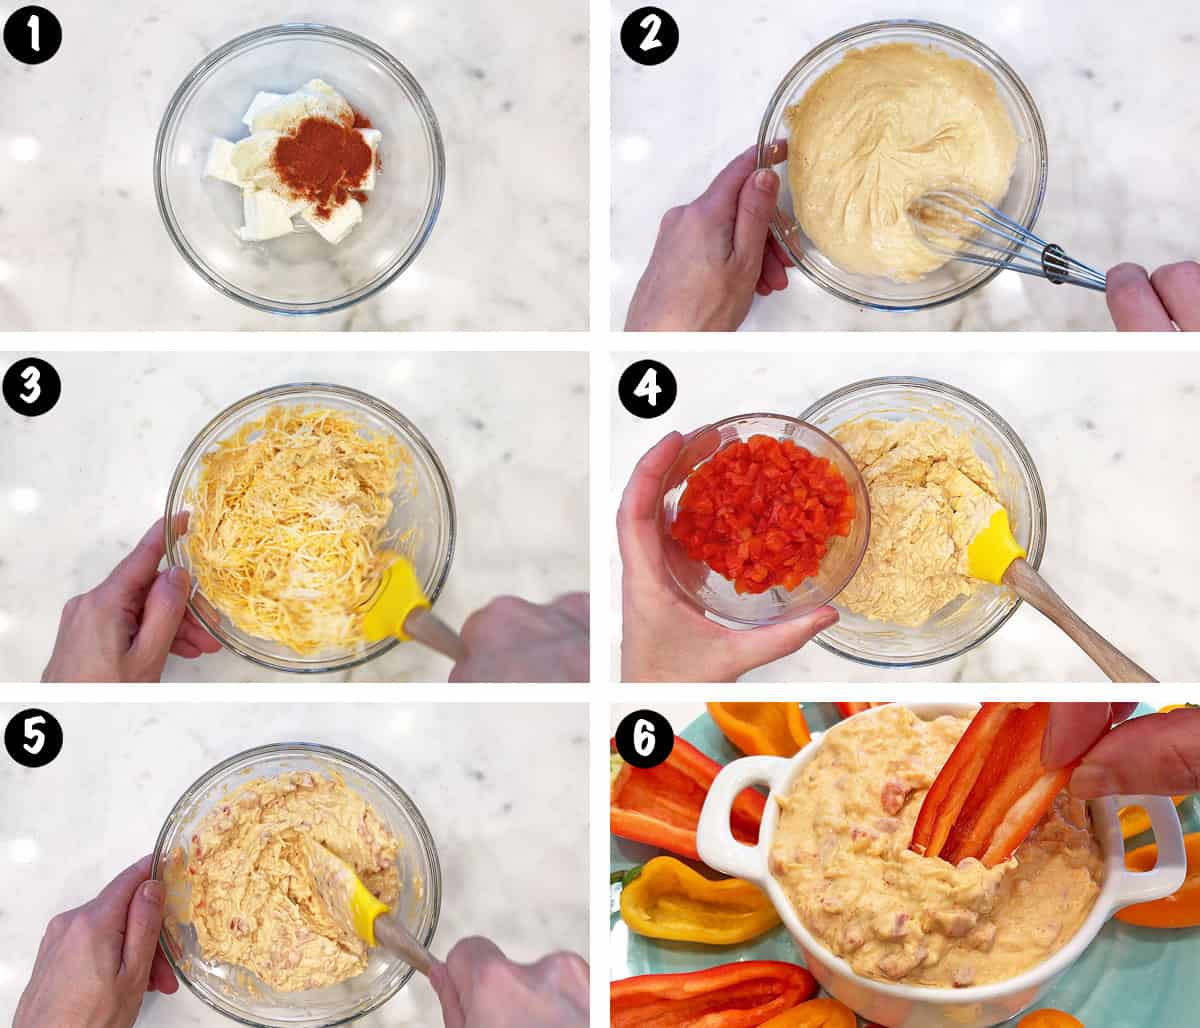 A six-photo collage showing the steps for making pimento cheese.